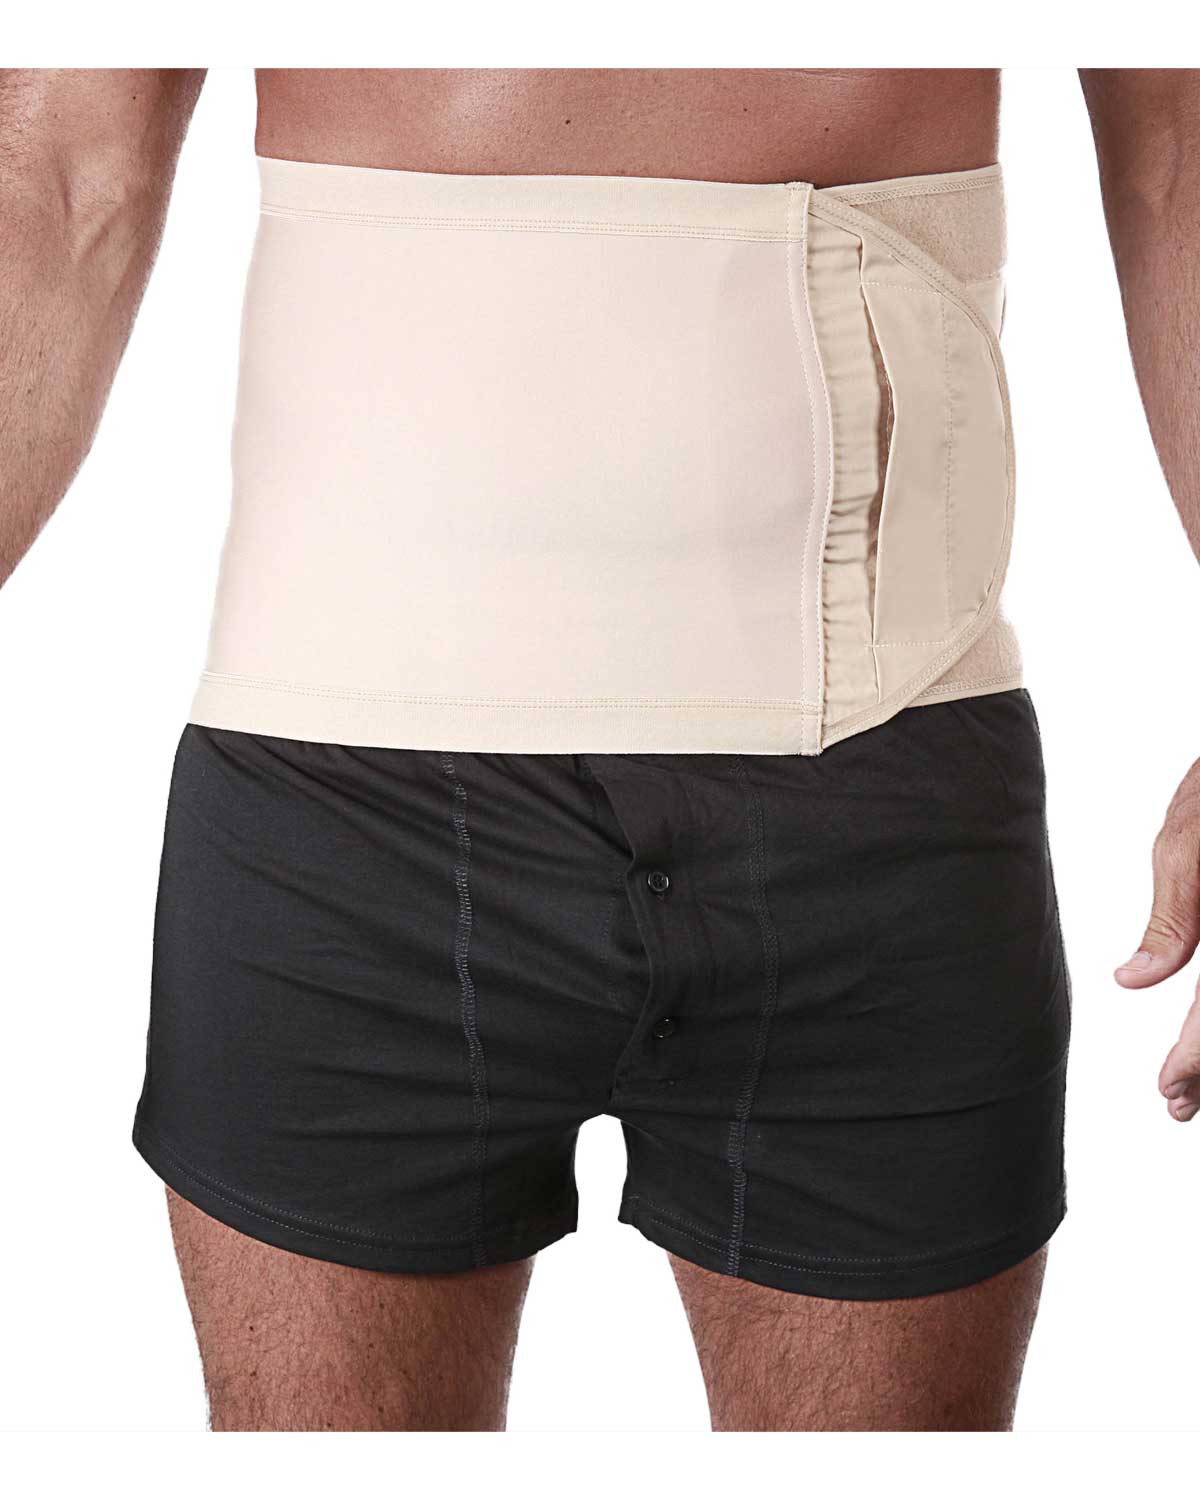 CUI Unisex Anti Roll Wraparound Ostomy Hernia Support Belt - 20cm/8inch - 1 each, 20 CM / 8 INCH, SMALL - WHITE - NO OPENING